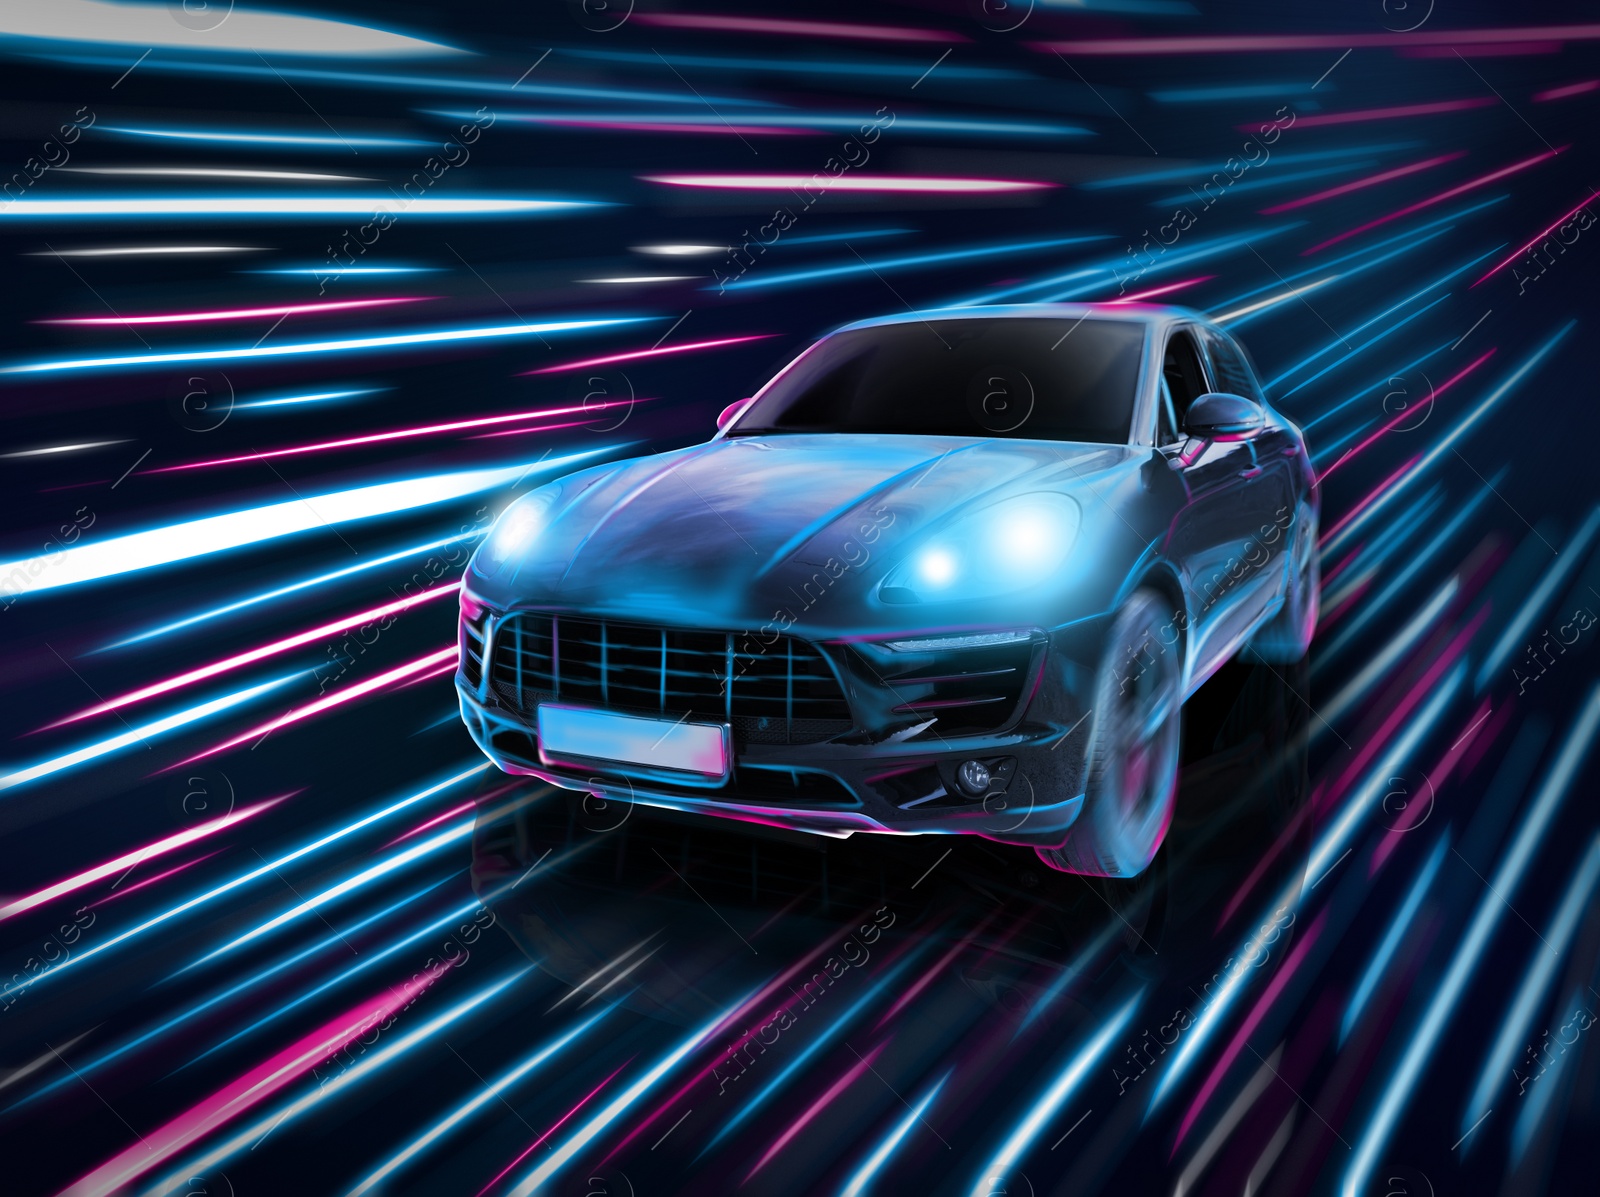 Image of Black modern car and speed light trails, motion blur effect